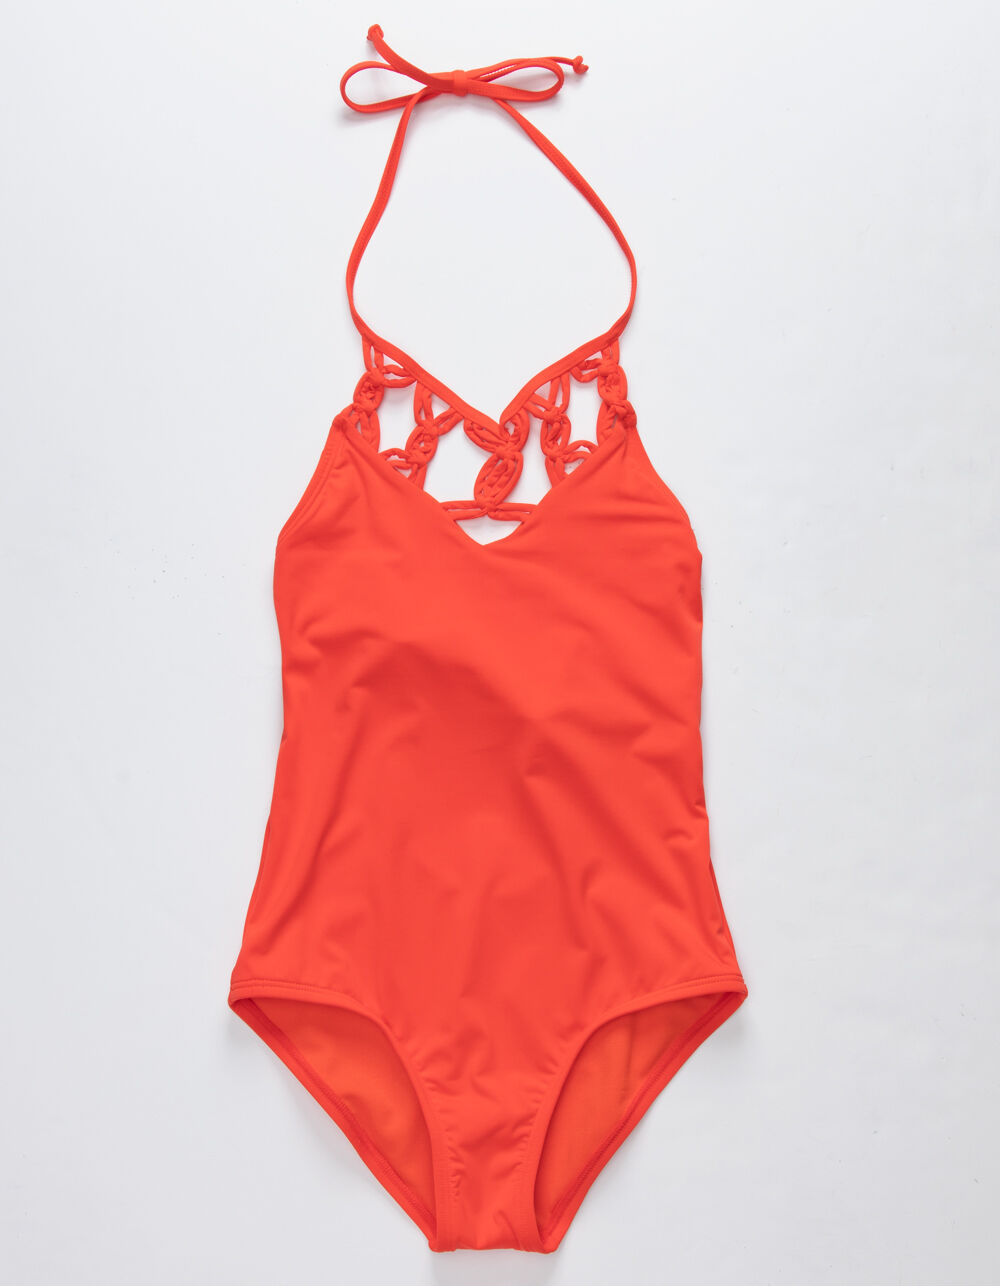 HOBIE Solids Girls One Piece Swimsuit - RED | Tillys